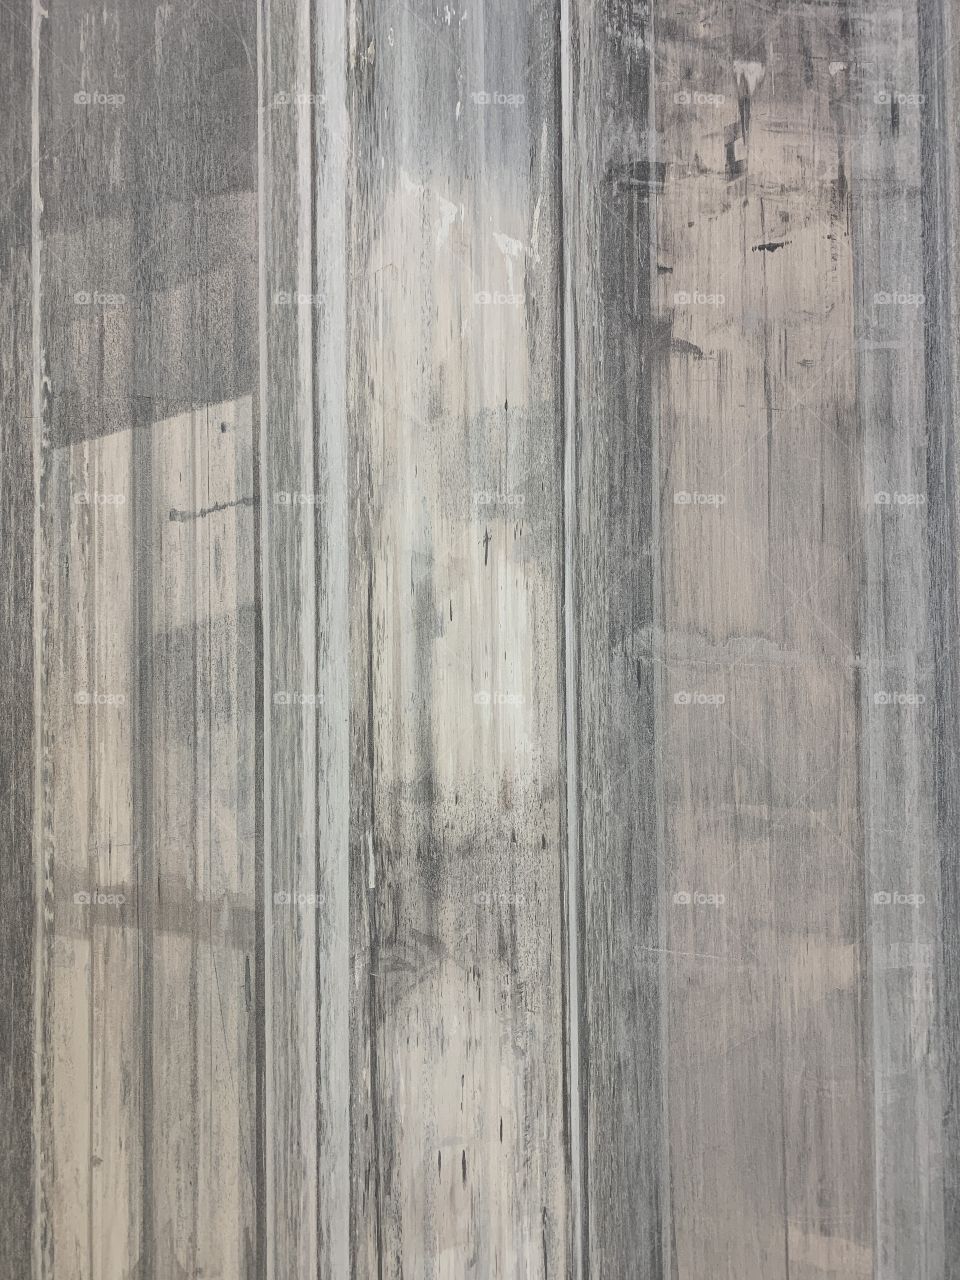 Vertical dirty wooden pattern background